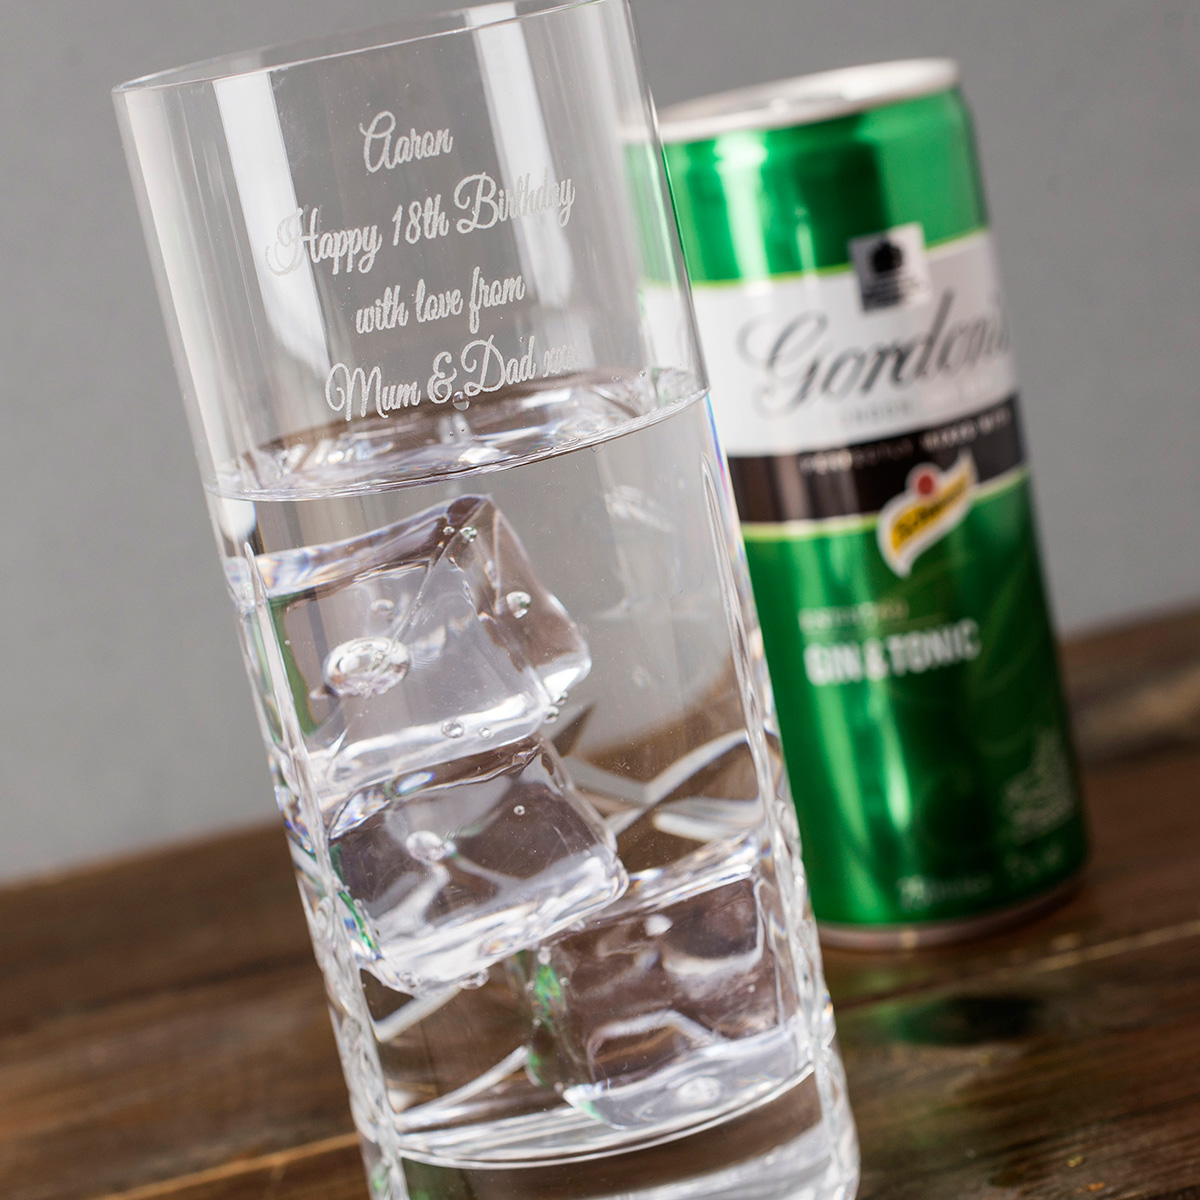 Engraved Crystal Highball Glass with Gin & Tonic